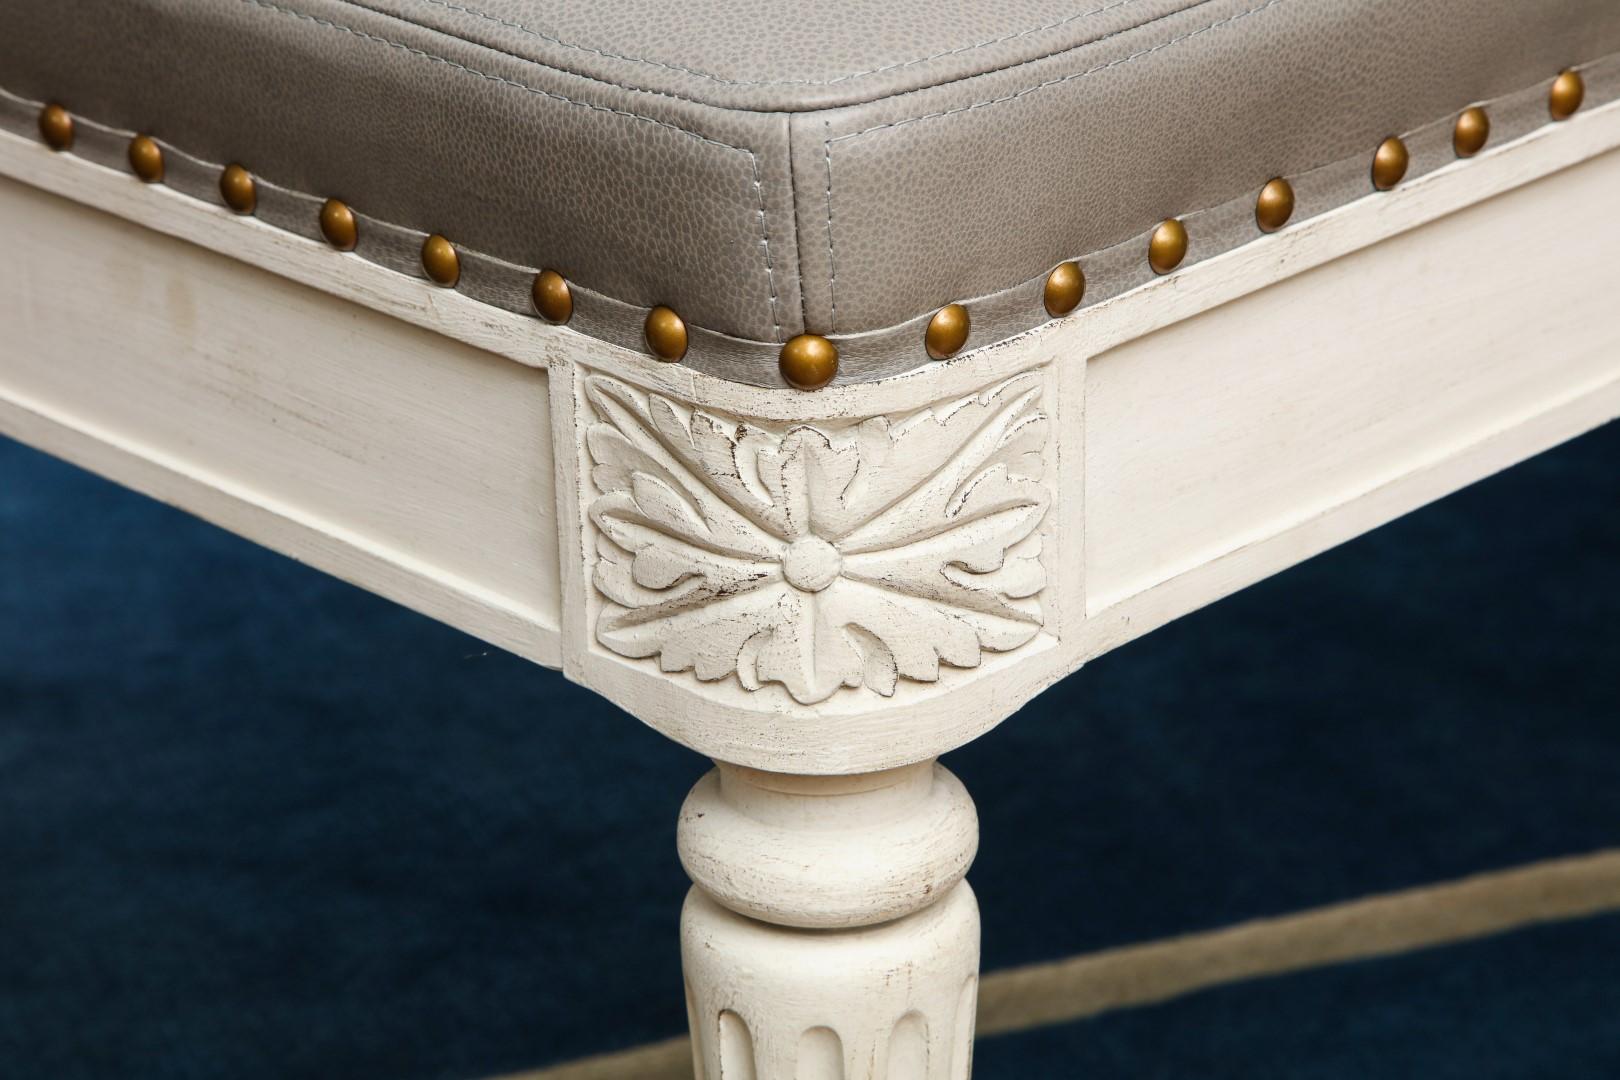 Contemporary Montreuil Bench, Louis XVI Style Bench with Leather Upholstery, by David Duncan For Sale